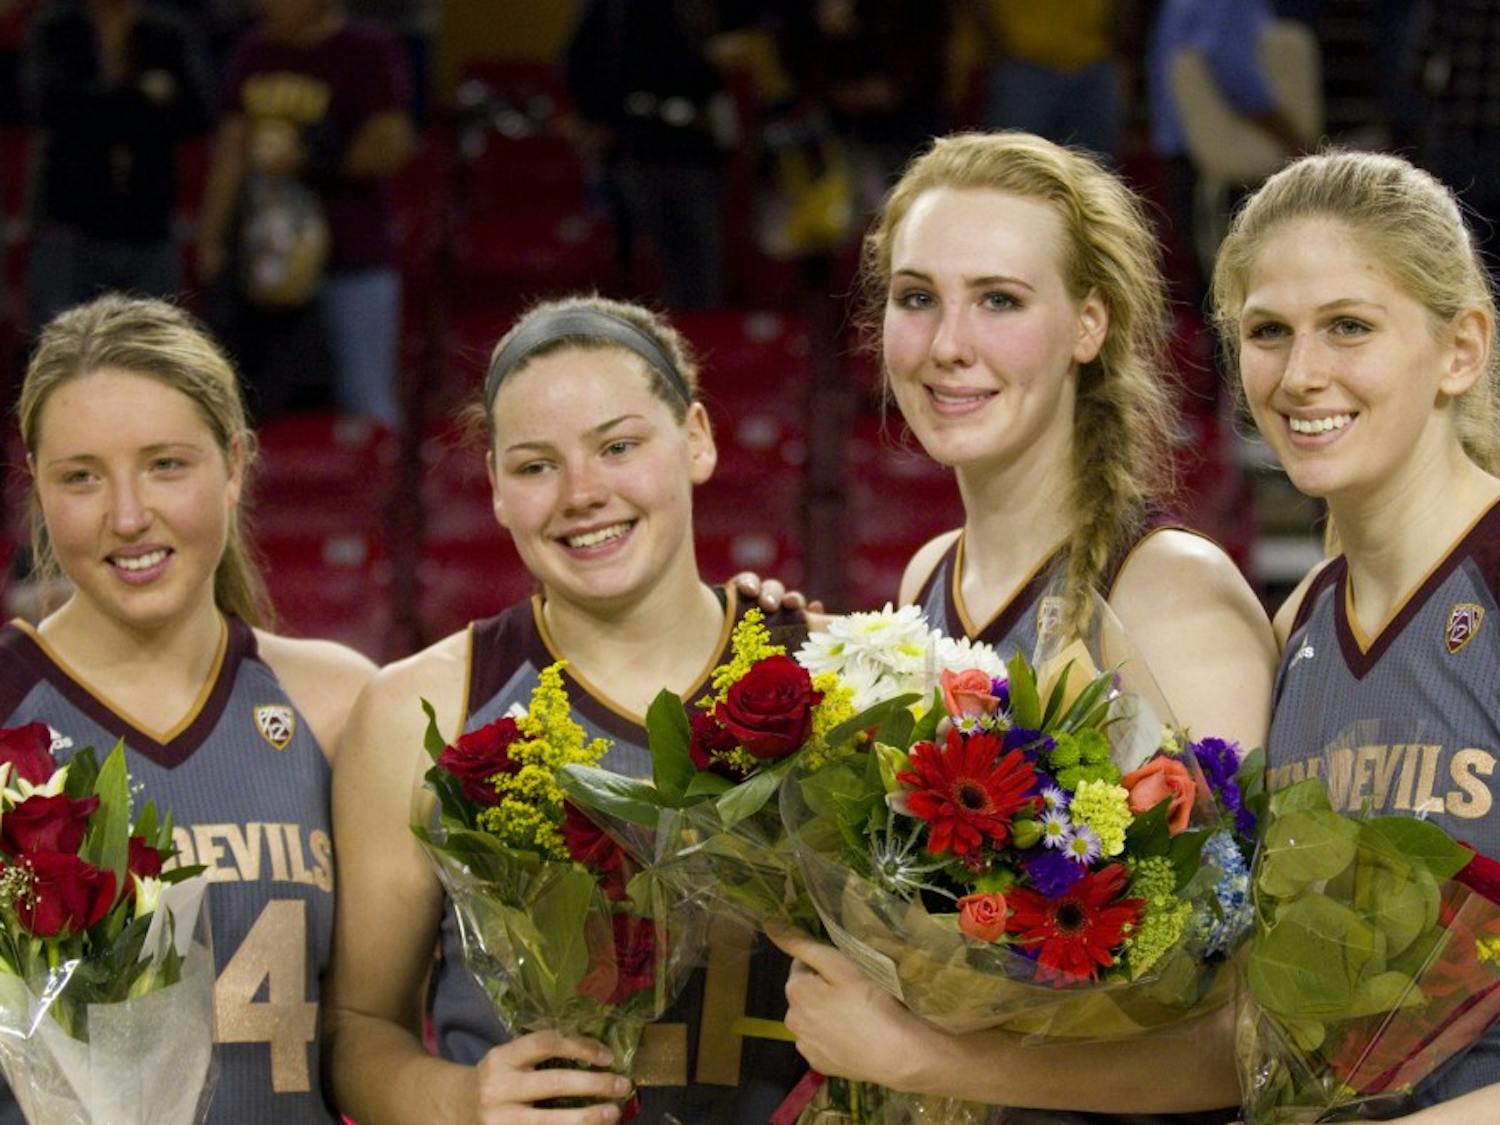 The four Sun Devil women's basketball seniors guard Kelsey Moos (24), forward Sophie Brunner (21), center Quinn Dornstauder (22), and center Sara Hattis (44) pose for a photo after a women's basketball game against the no. 15 ranked UCLA Bruins in Wells Fargo Arena in Tempe, Arizona on Sunday, Feb. 26, 2017. ASU lost 55-52.  (Josh Orcutt/State Press)